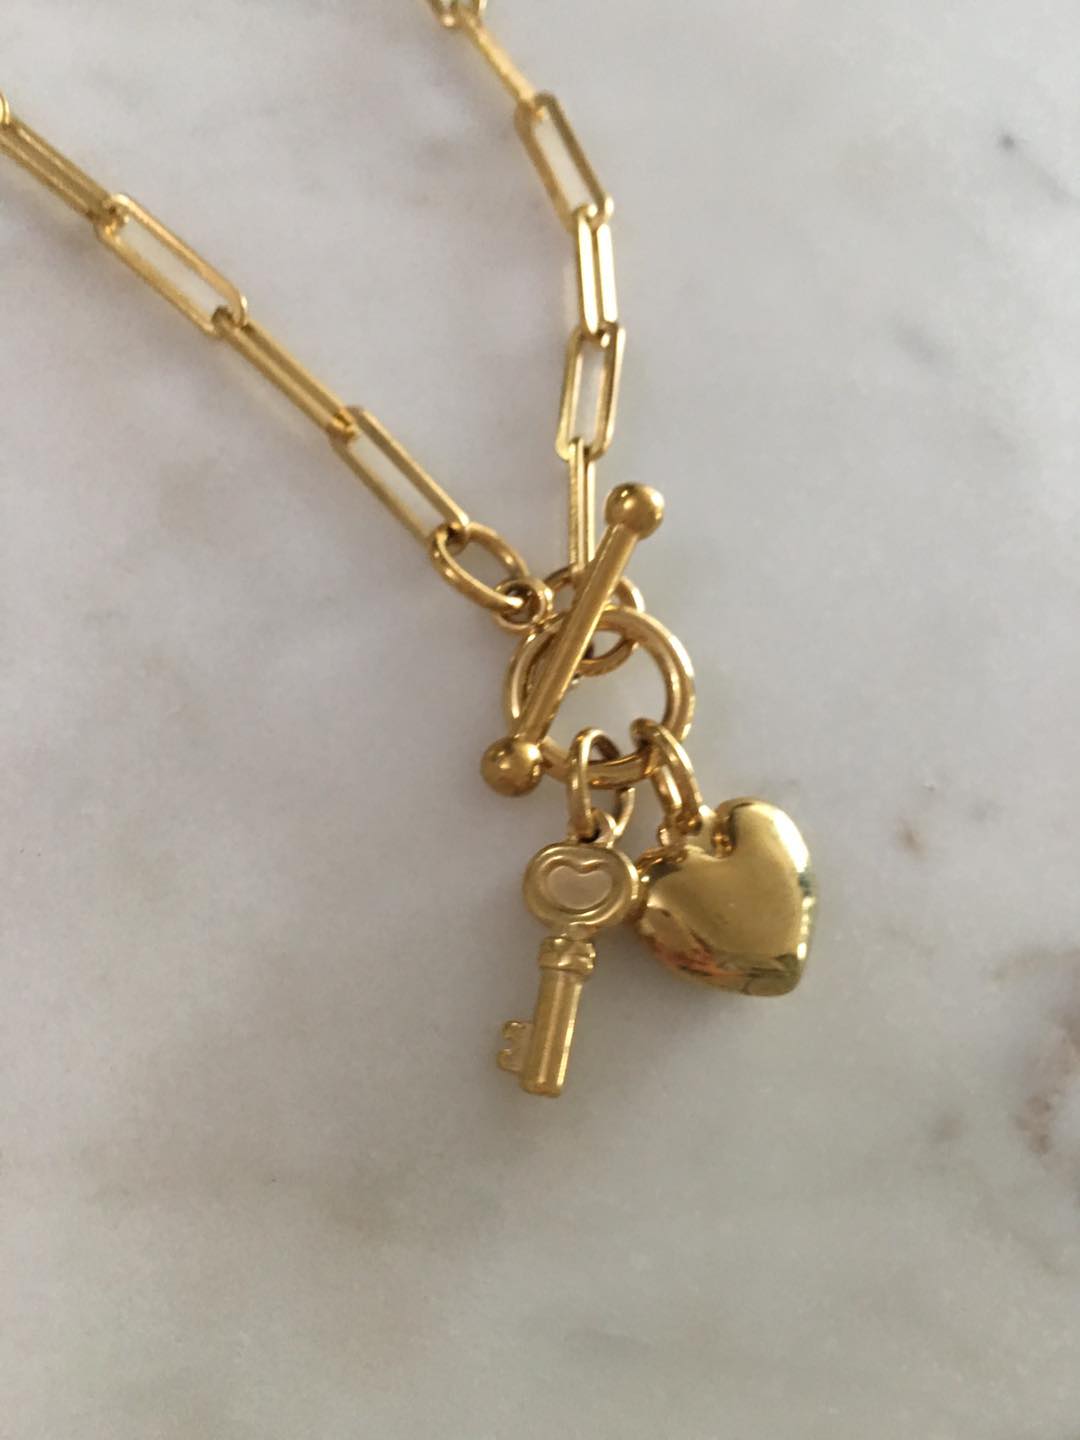 Shiloh chain with small key and heart pendant